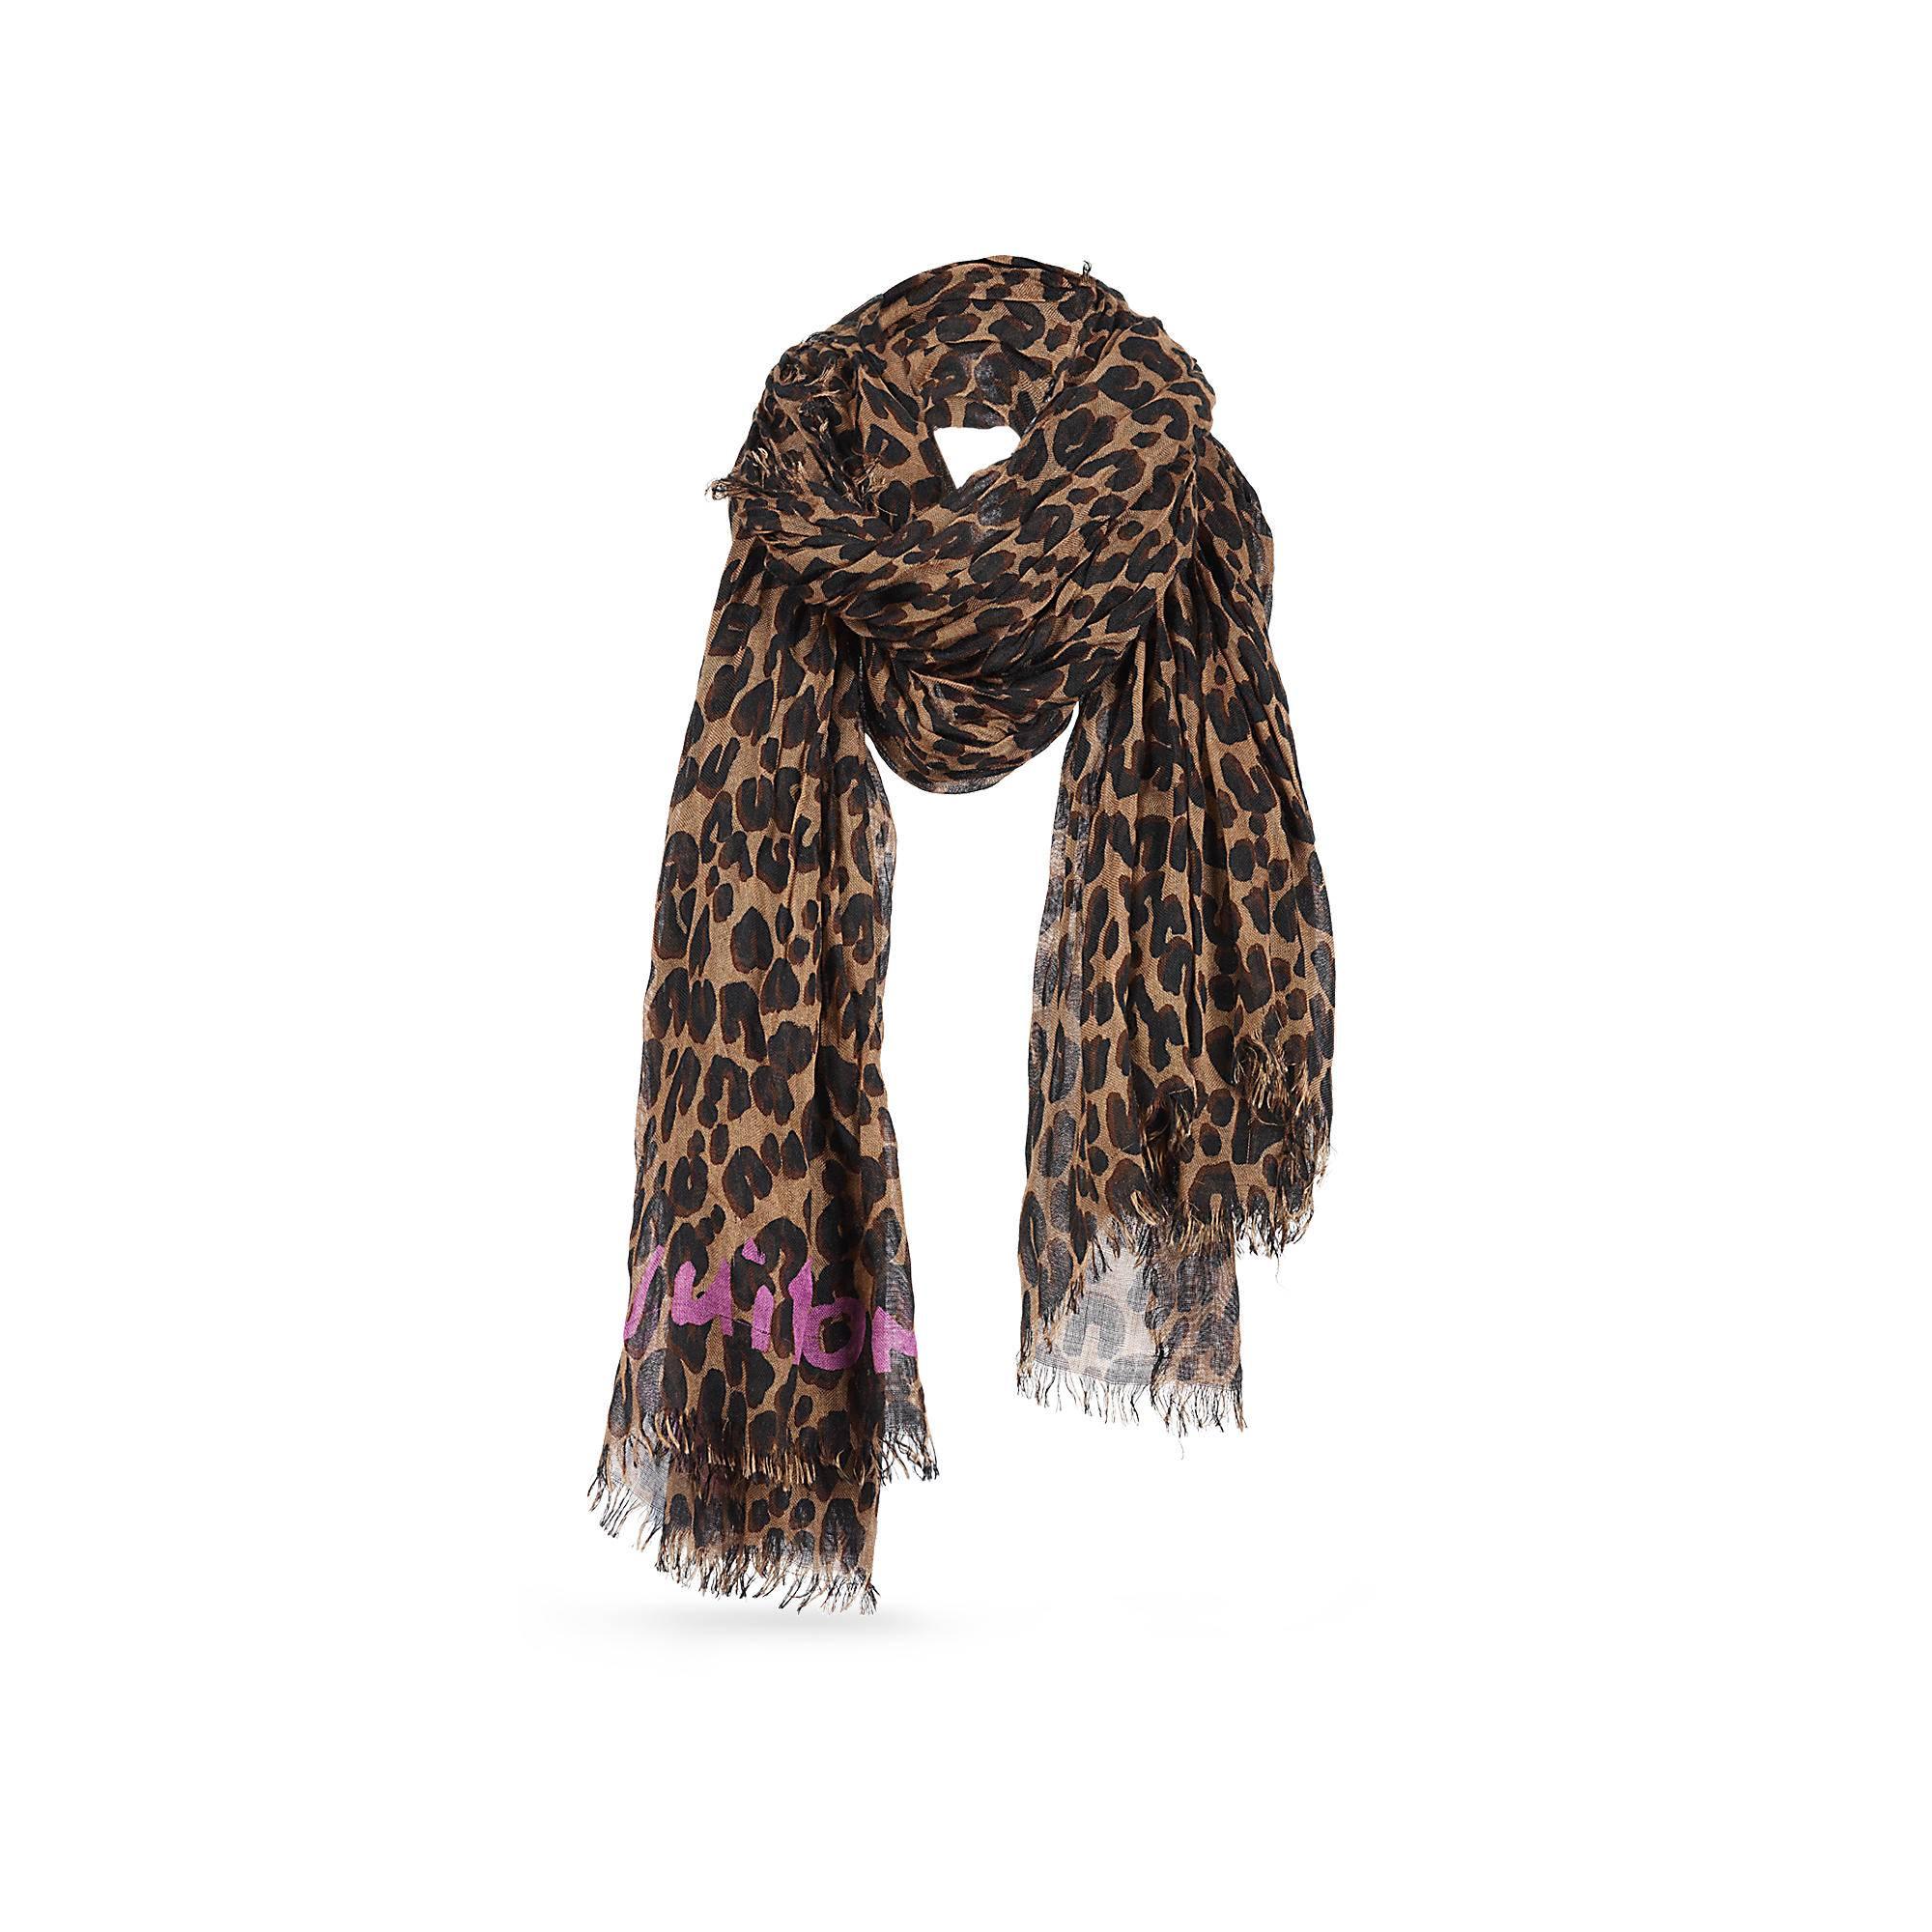 Expect to attract attention with the Leopard Stole. This exhilarating interpretation of Stephen Sprouse’s design boasts a gorgeous mix of cashmere and silk, creating an item that hangs effortlessly.
Retail price: 615,00 